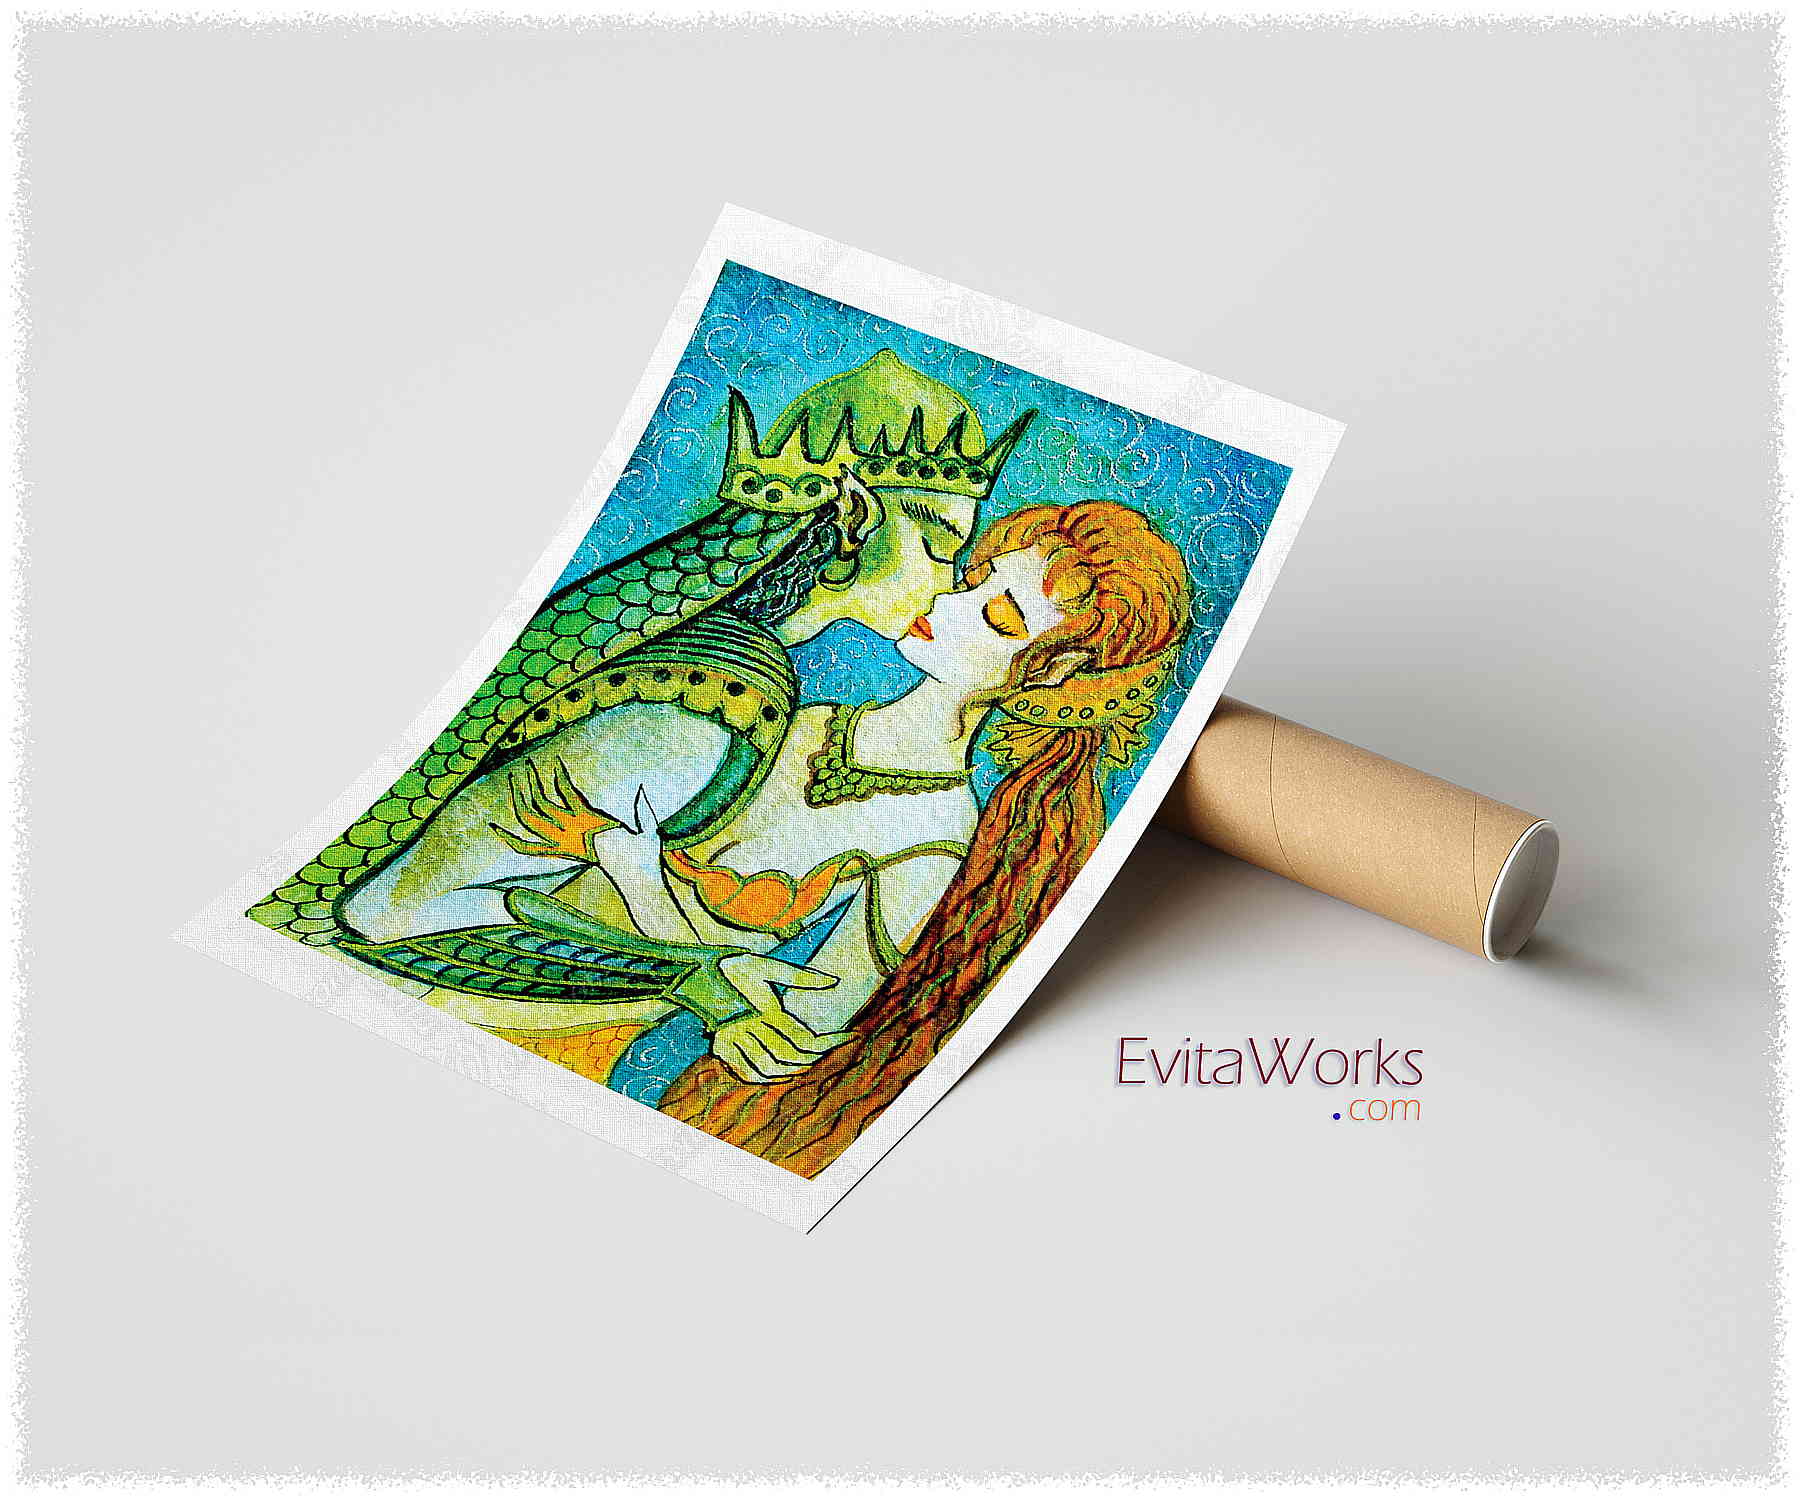 Hit to learn about "Mermaid 49, beautiful female creature, couple art" on prints